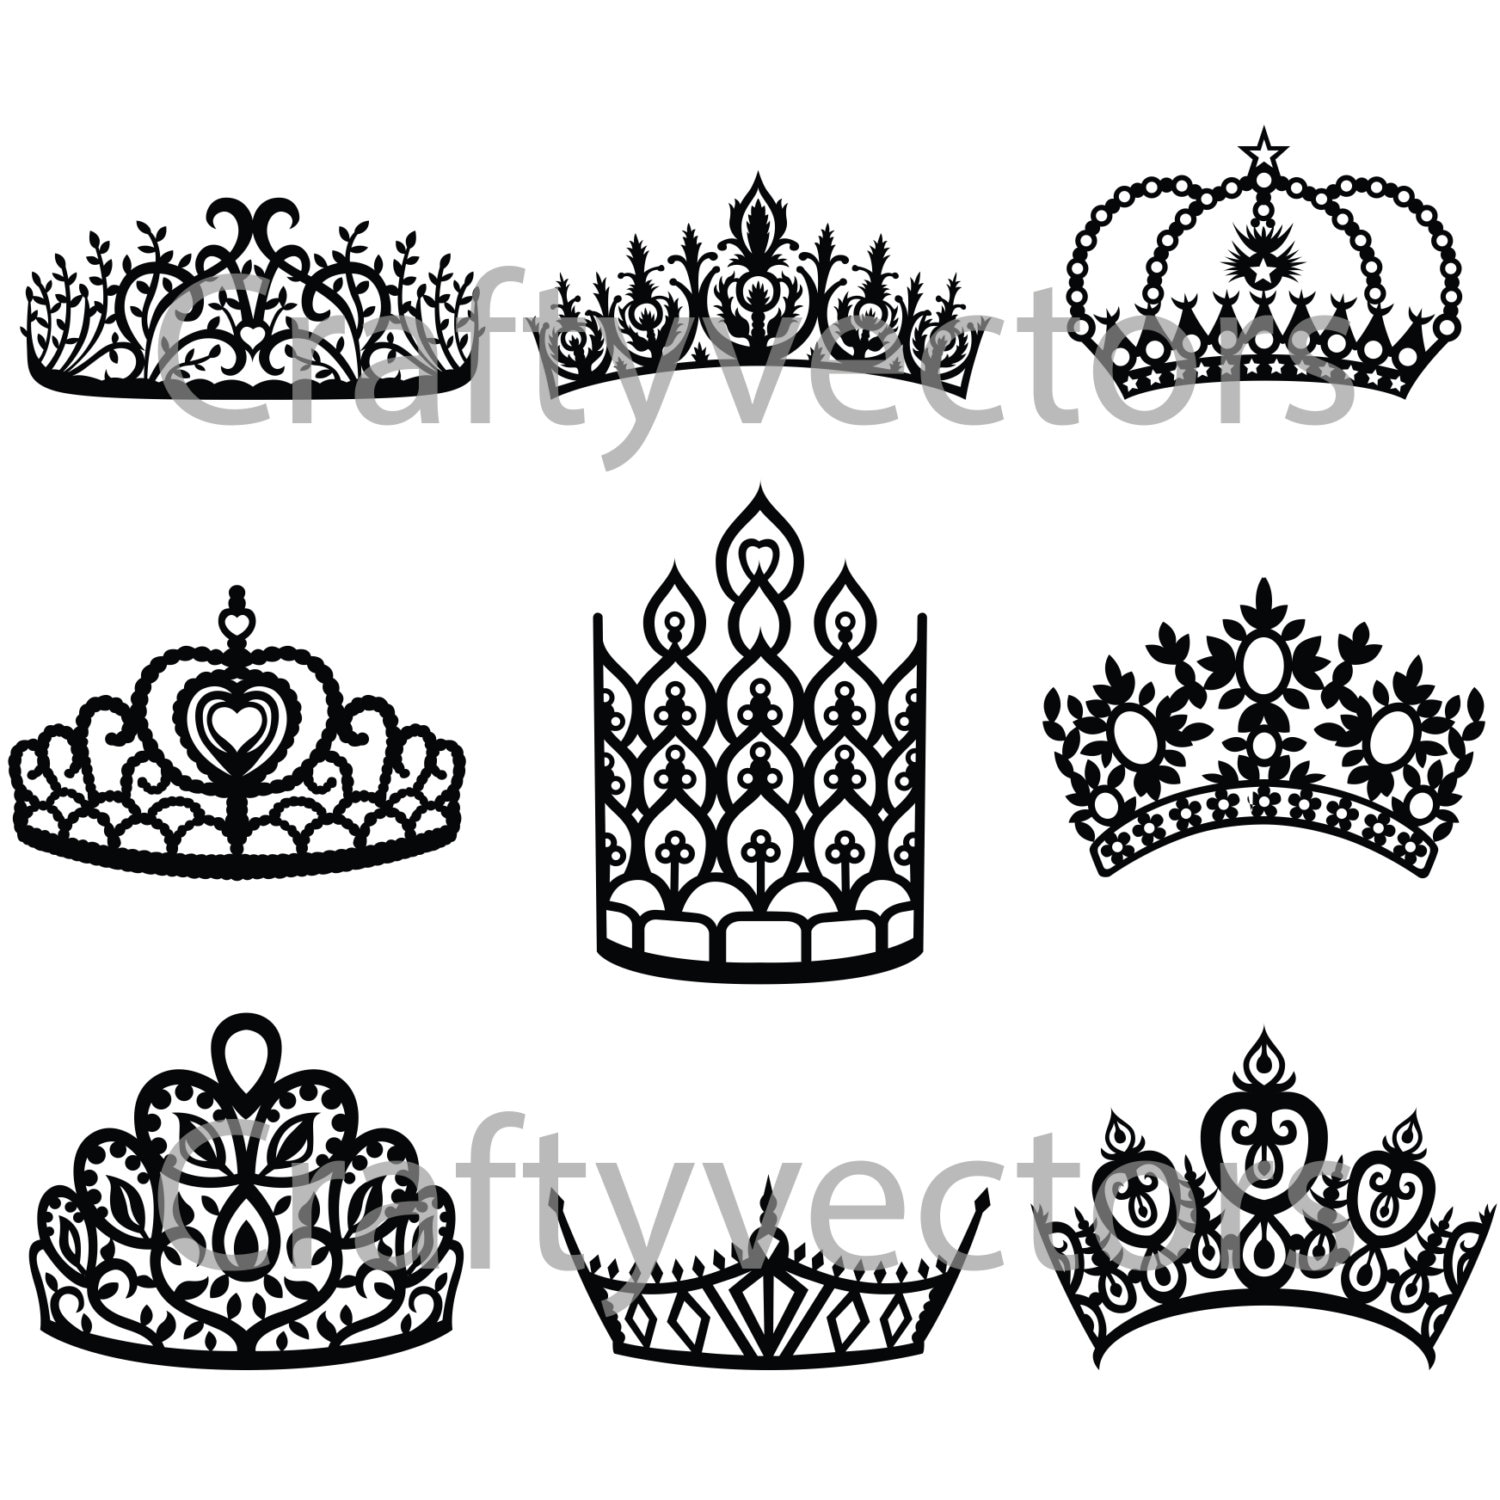 Crowns and Tiaras 2 vector file